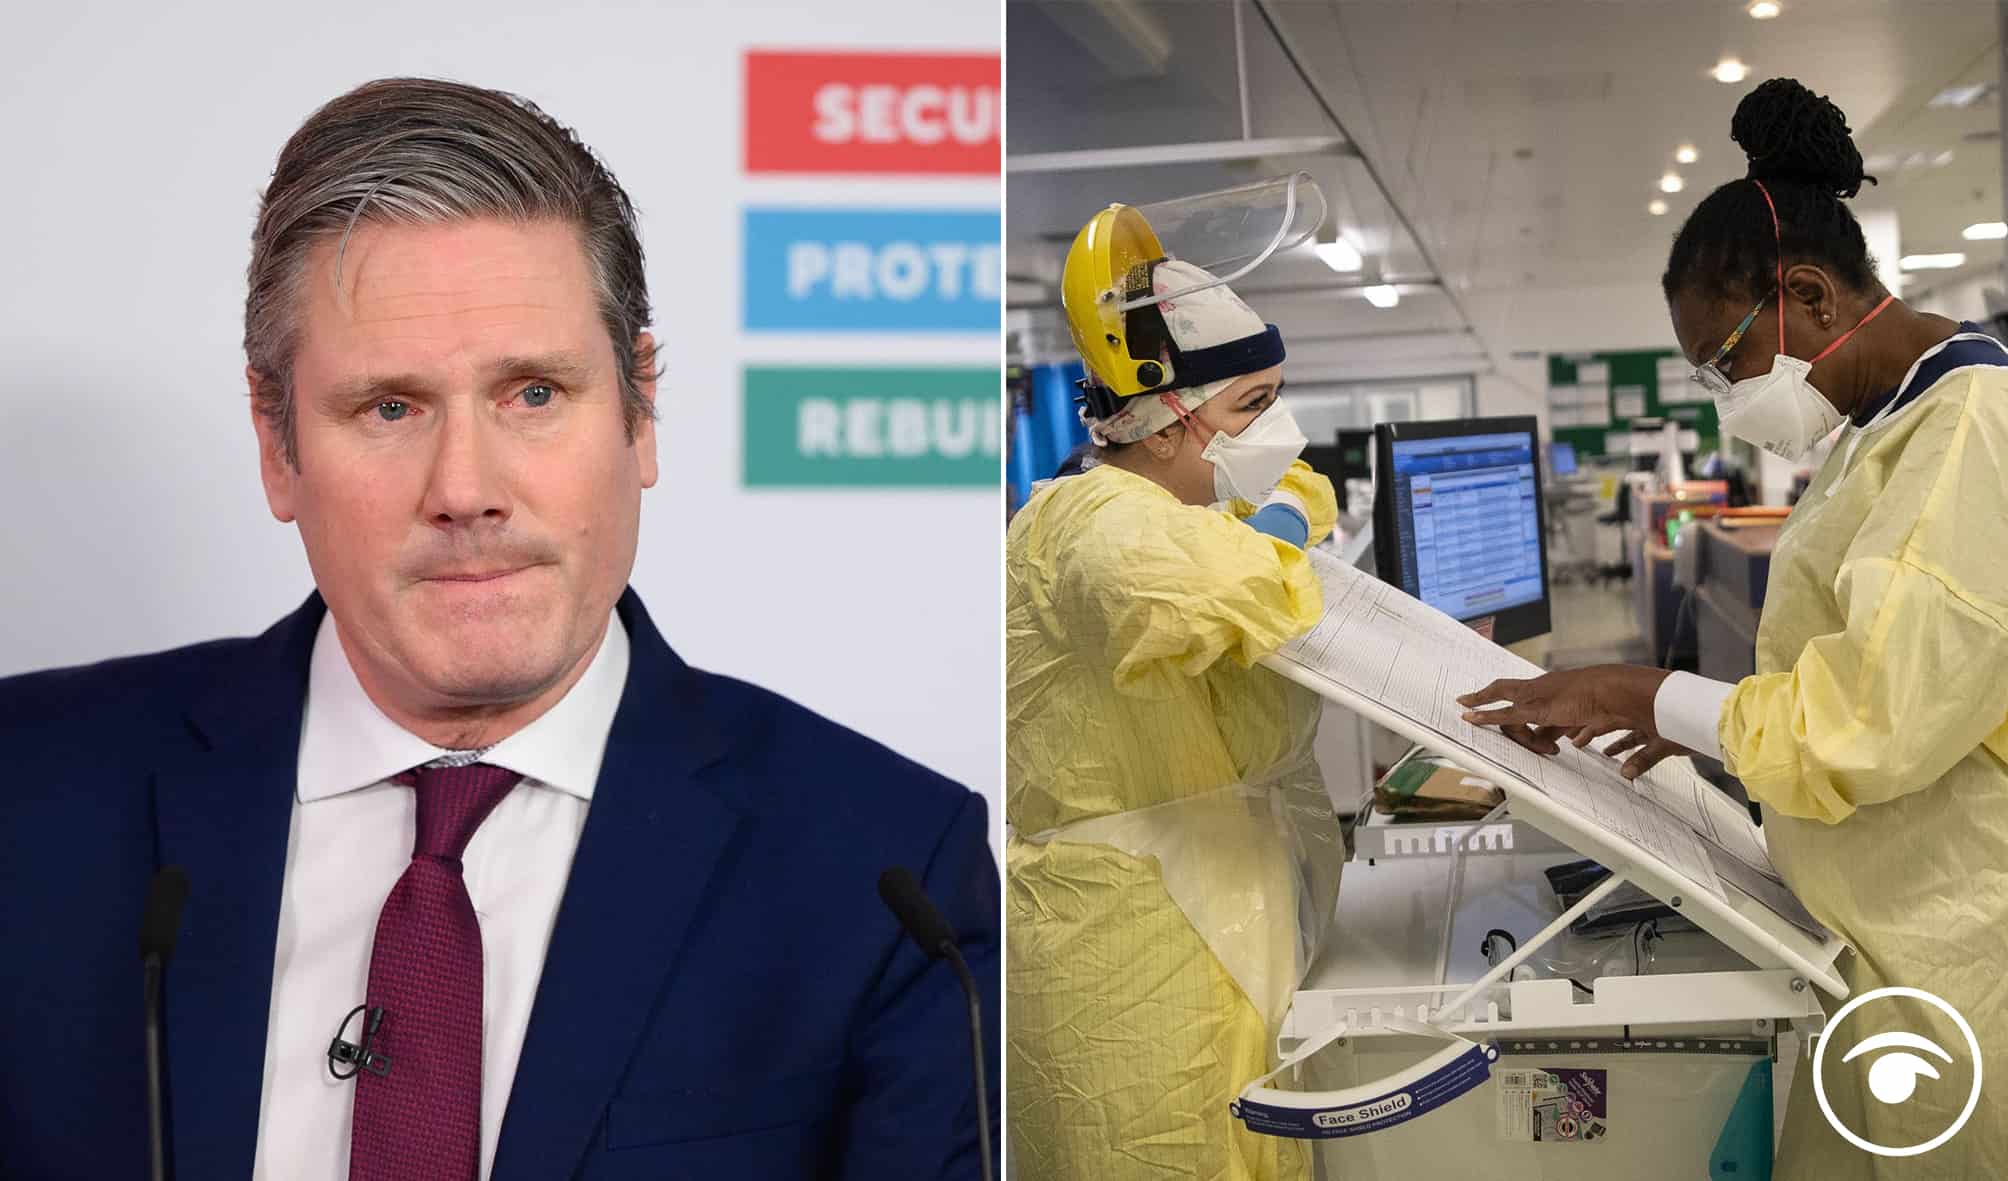 Just 1 in 3 NHS staff satisfied with pay as Starmer backs ‘fair’ raise for nurses but not 12.5% increase